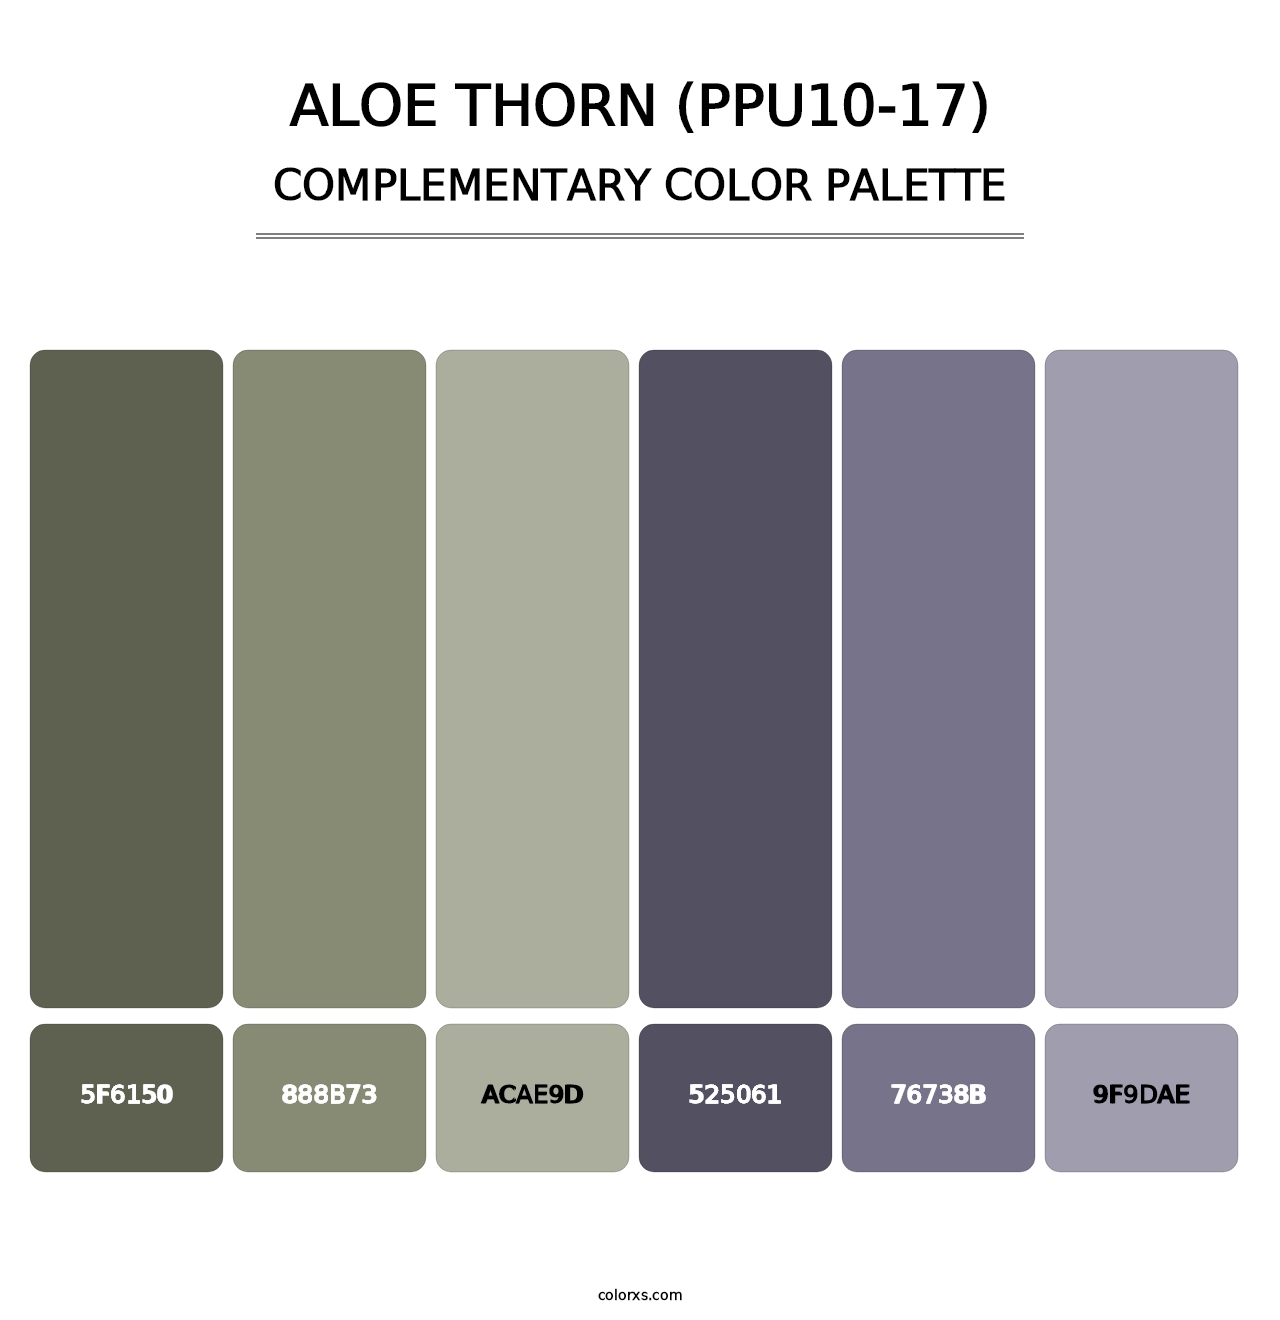 Aloe Thorn (PPU10-17) - Complementary Color Palette